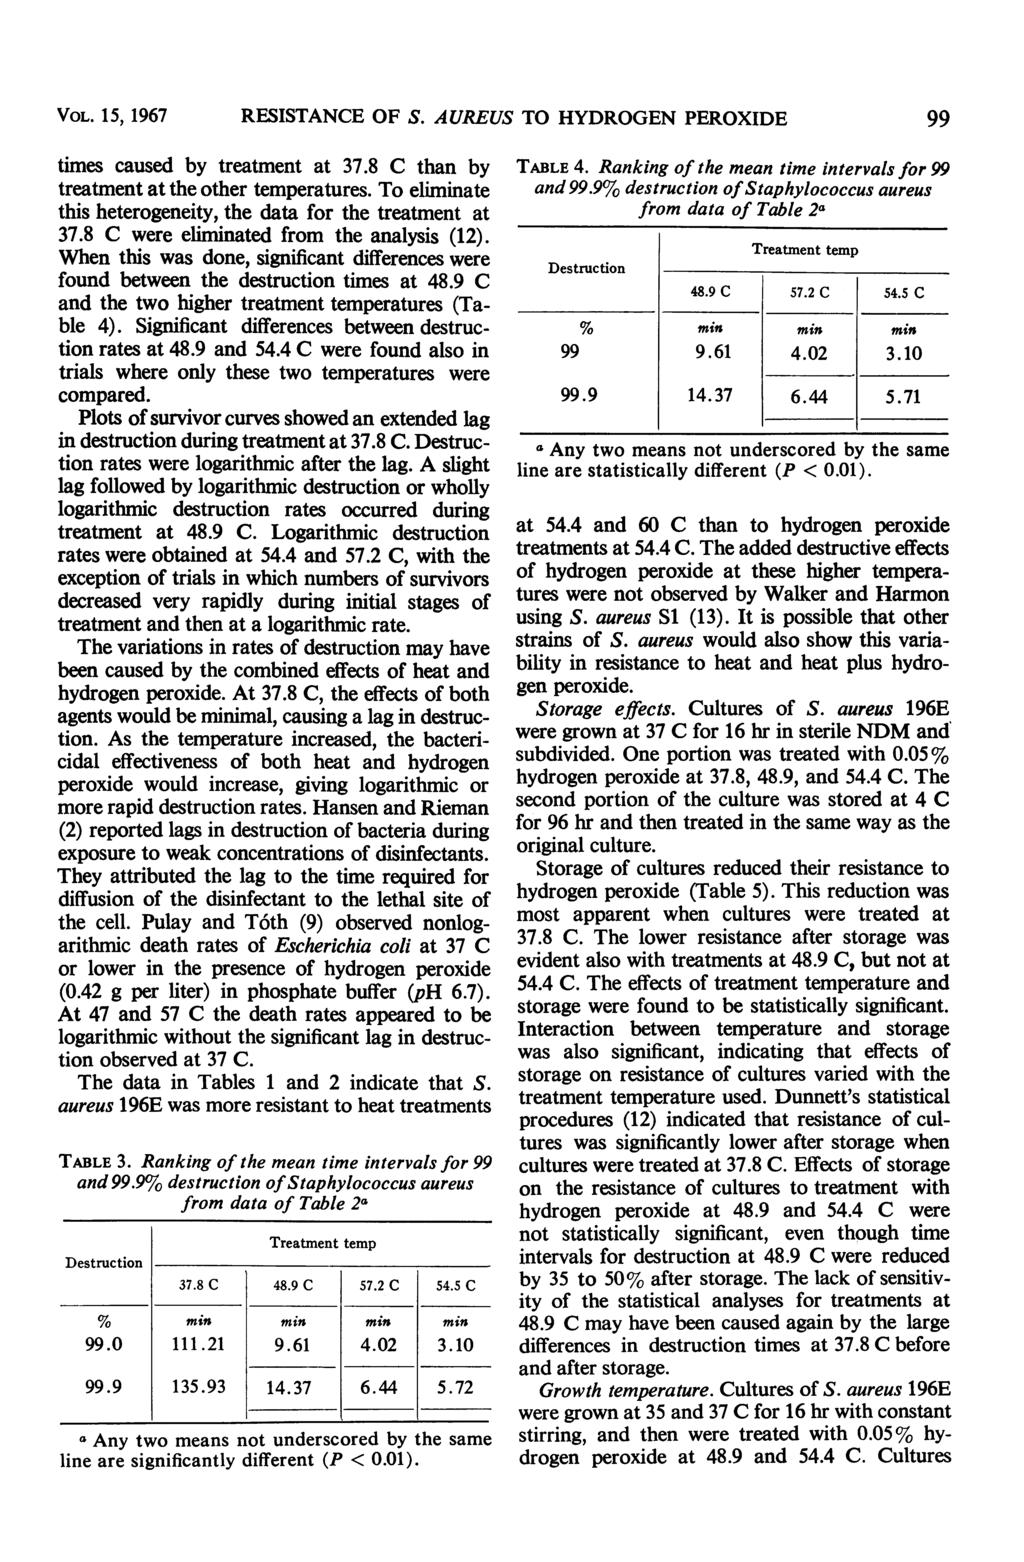 VOL. 15, 1967 RESISTANCE OF S. AUREUS TO HYDROGEN PEROXIDE 99 times caused by treatment at 37.8 C than by treatment at the other temperatures.